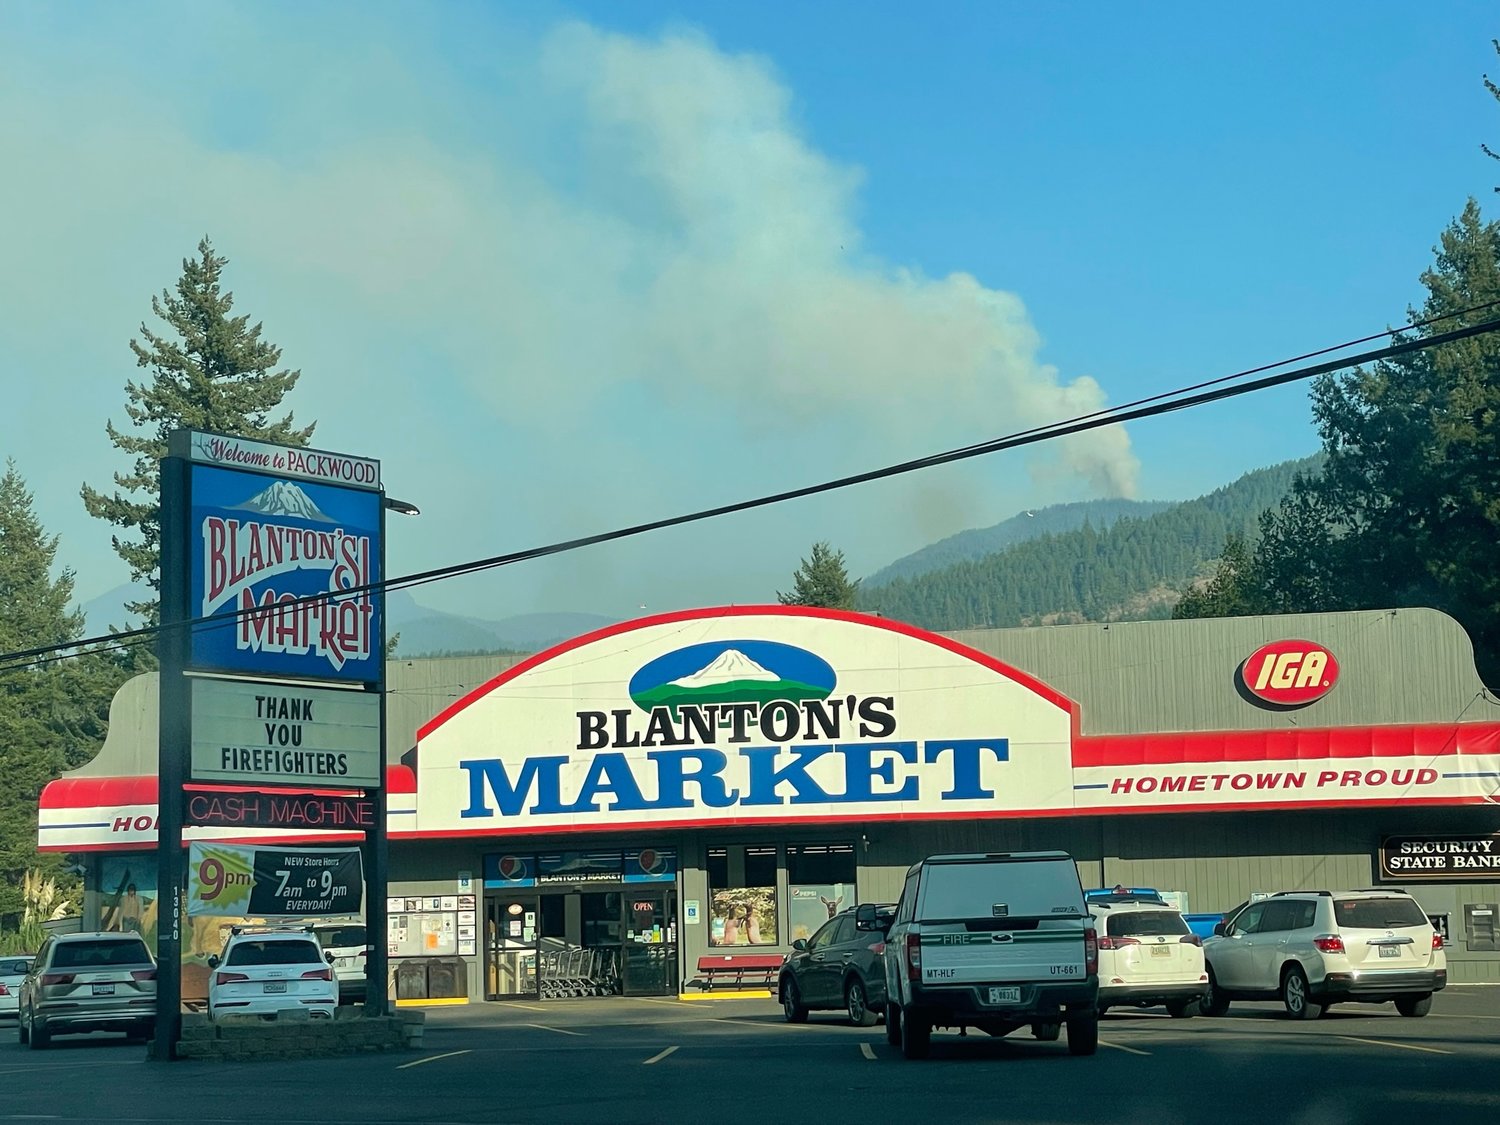 Larry Wetzel provided this photo of smoke from the Goat Rocks Fire as seen from Packwood Saturday.